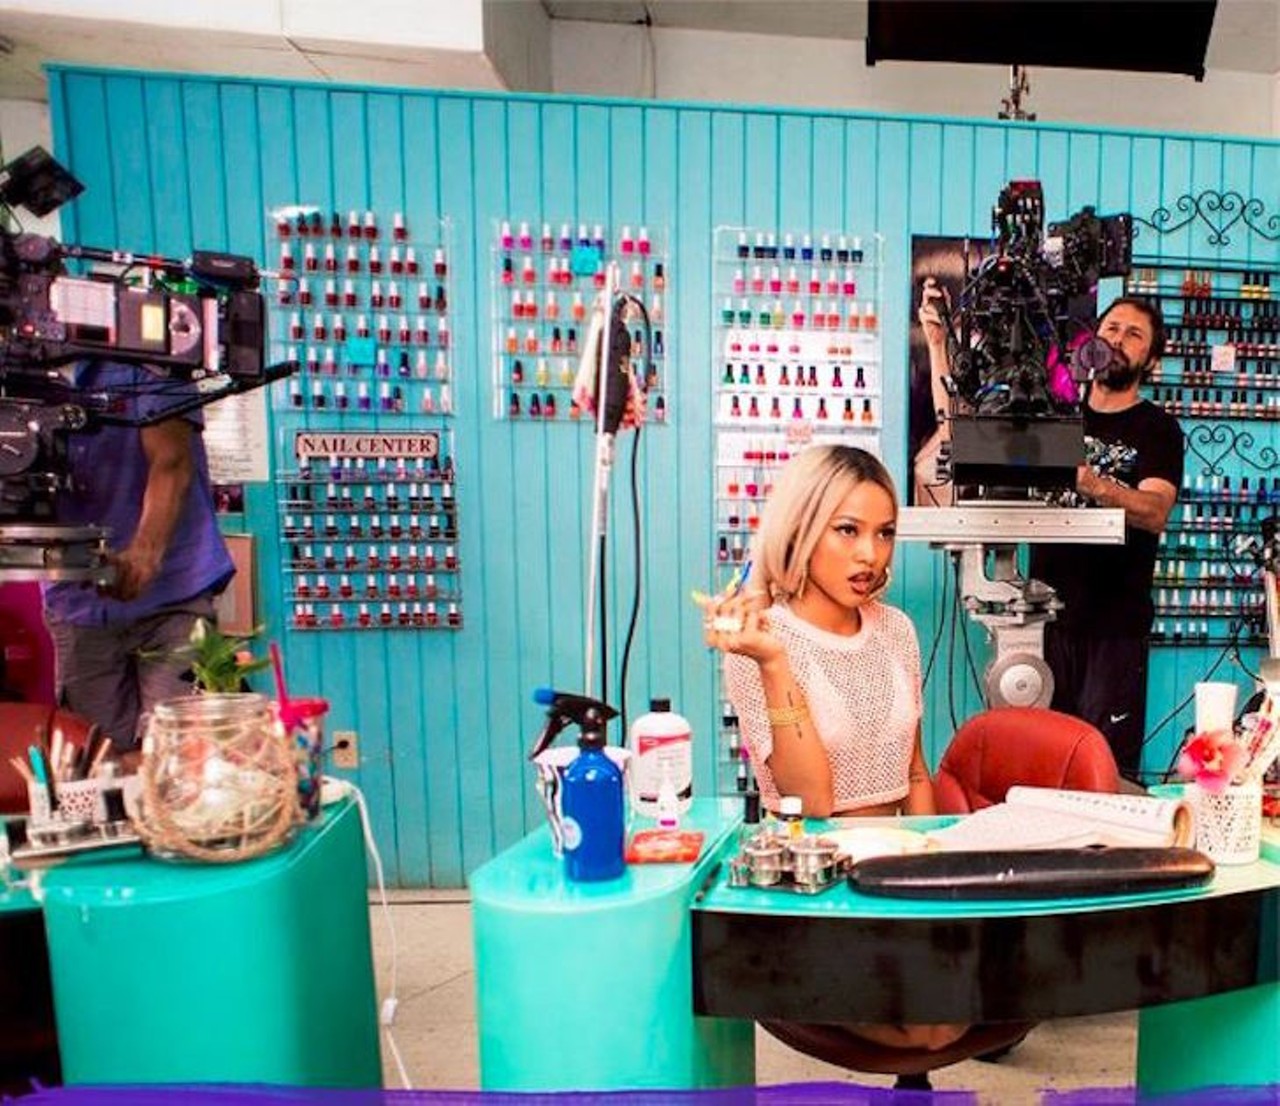  Just stay indoors all day and watch 'Claws' 
Scorching summer days are the prefect time for binge-watching, you wont be able to focus on the heat when caught up in the drama of the Claws. This TNT series set in Palmetto, Florida follows the crew of of the Nail Artisan salon of Manatee County as they enter the traditionally male world of organized crime. Desna Simms, played by Niecy Nash, the owner of the salon has high hopes of owning a much better nail salon, but how far will her high hopes get her?
Photo via Claws/Facebook